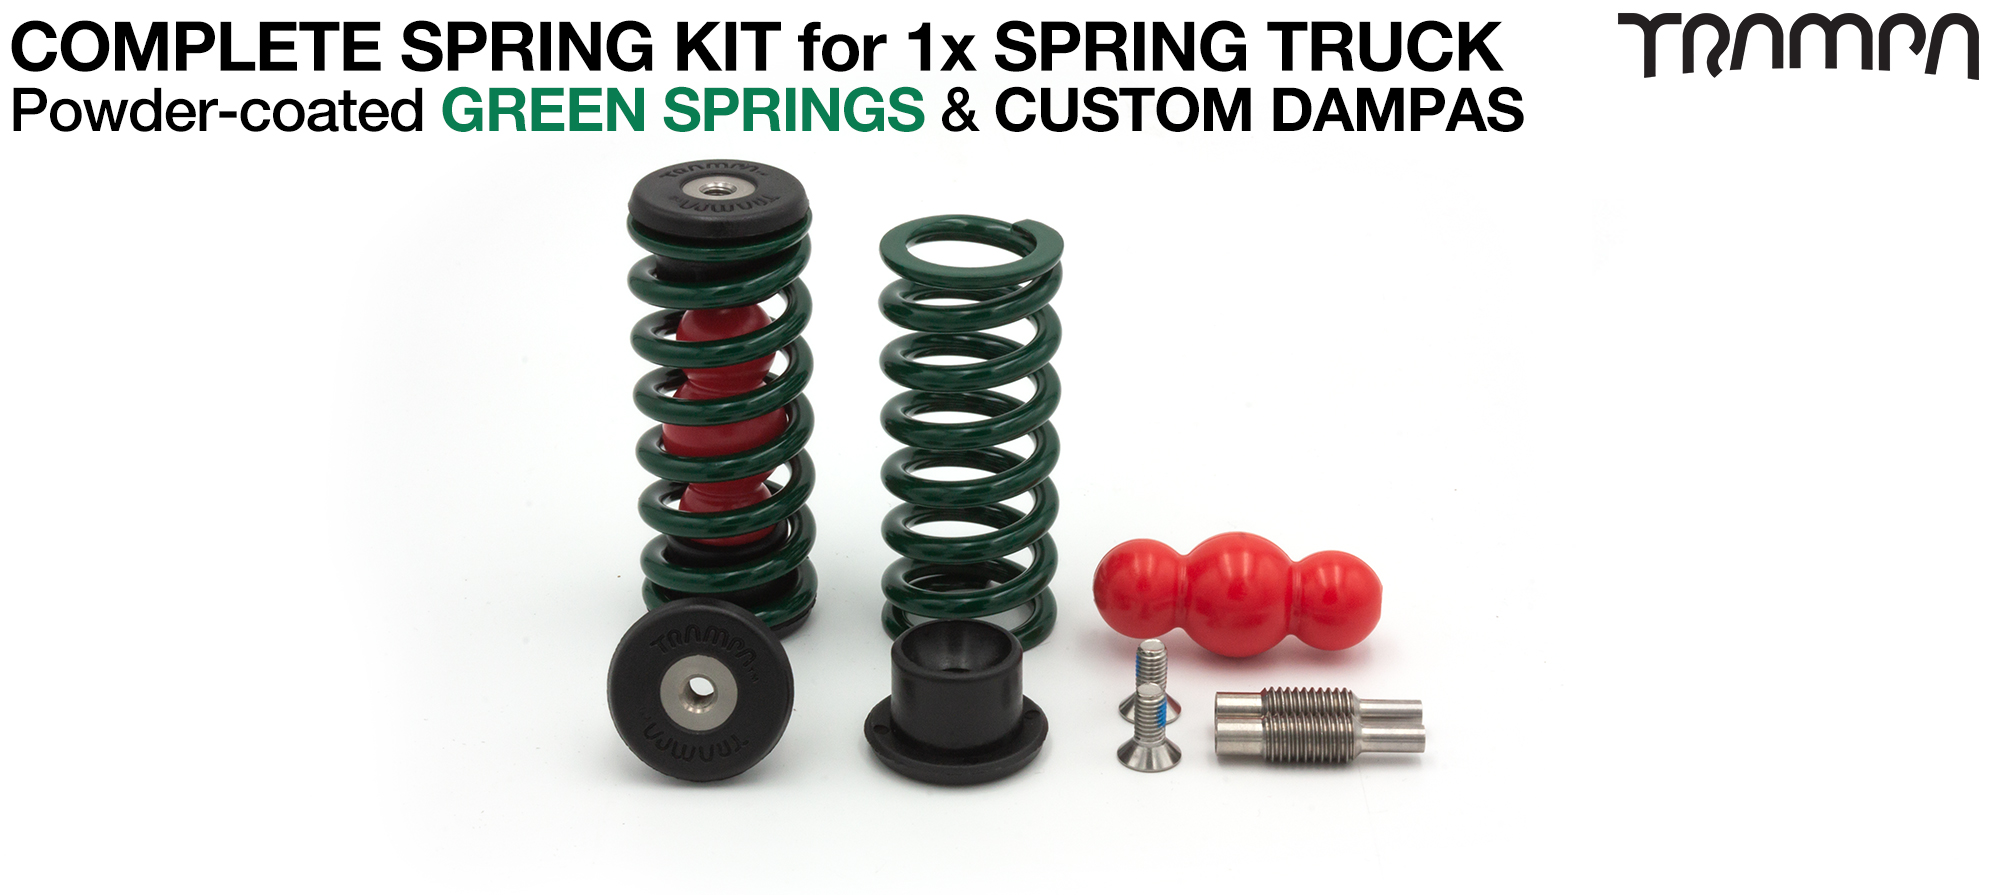 Spring kit Complete for 1x Truck - 2x Spring 2x Dampa 4x Spring Retainers 2x Spring Adjuster & 2 M5x12mm Countersunk Bolt  GREEN Springs 